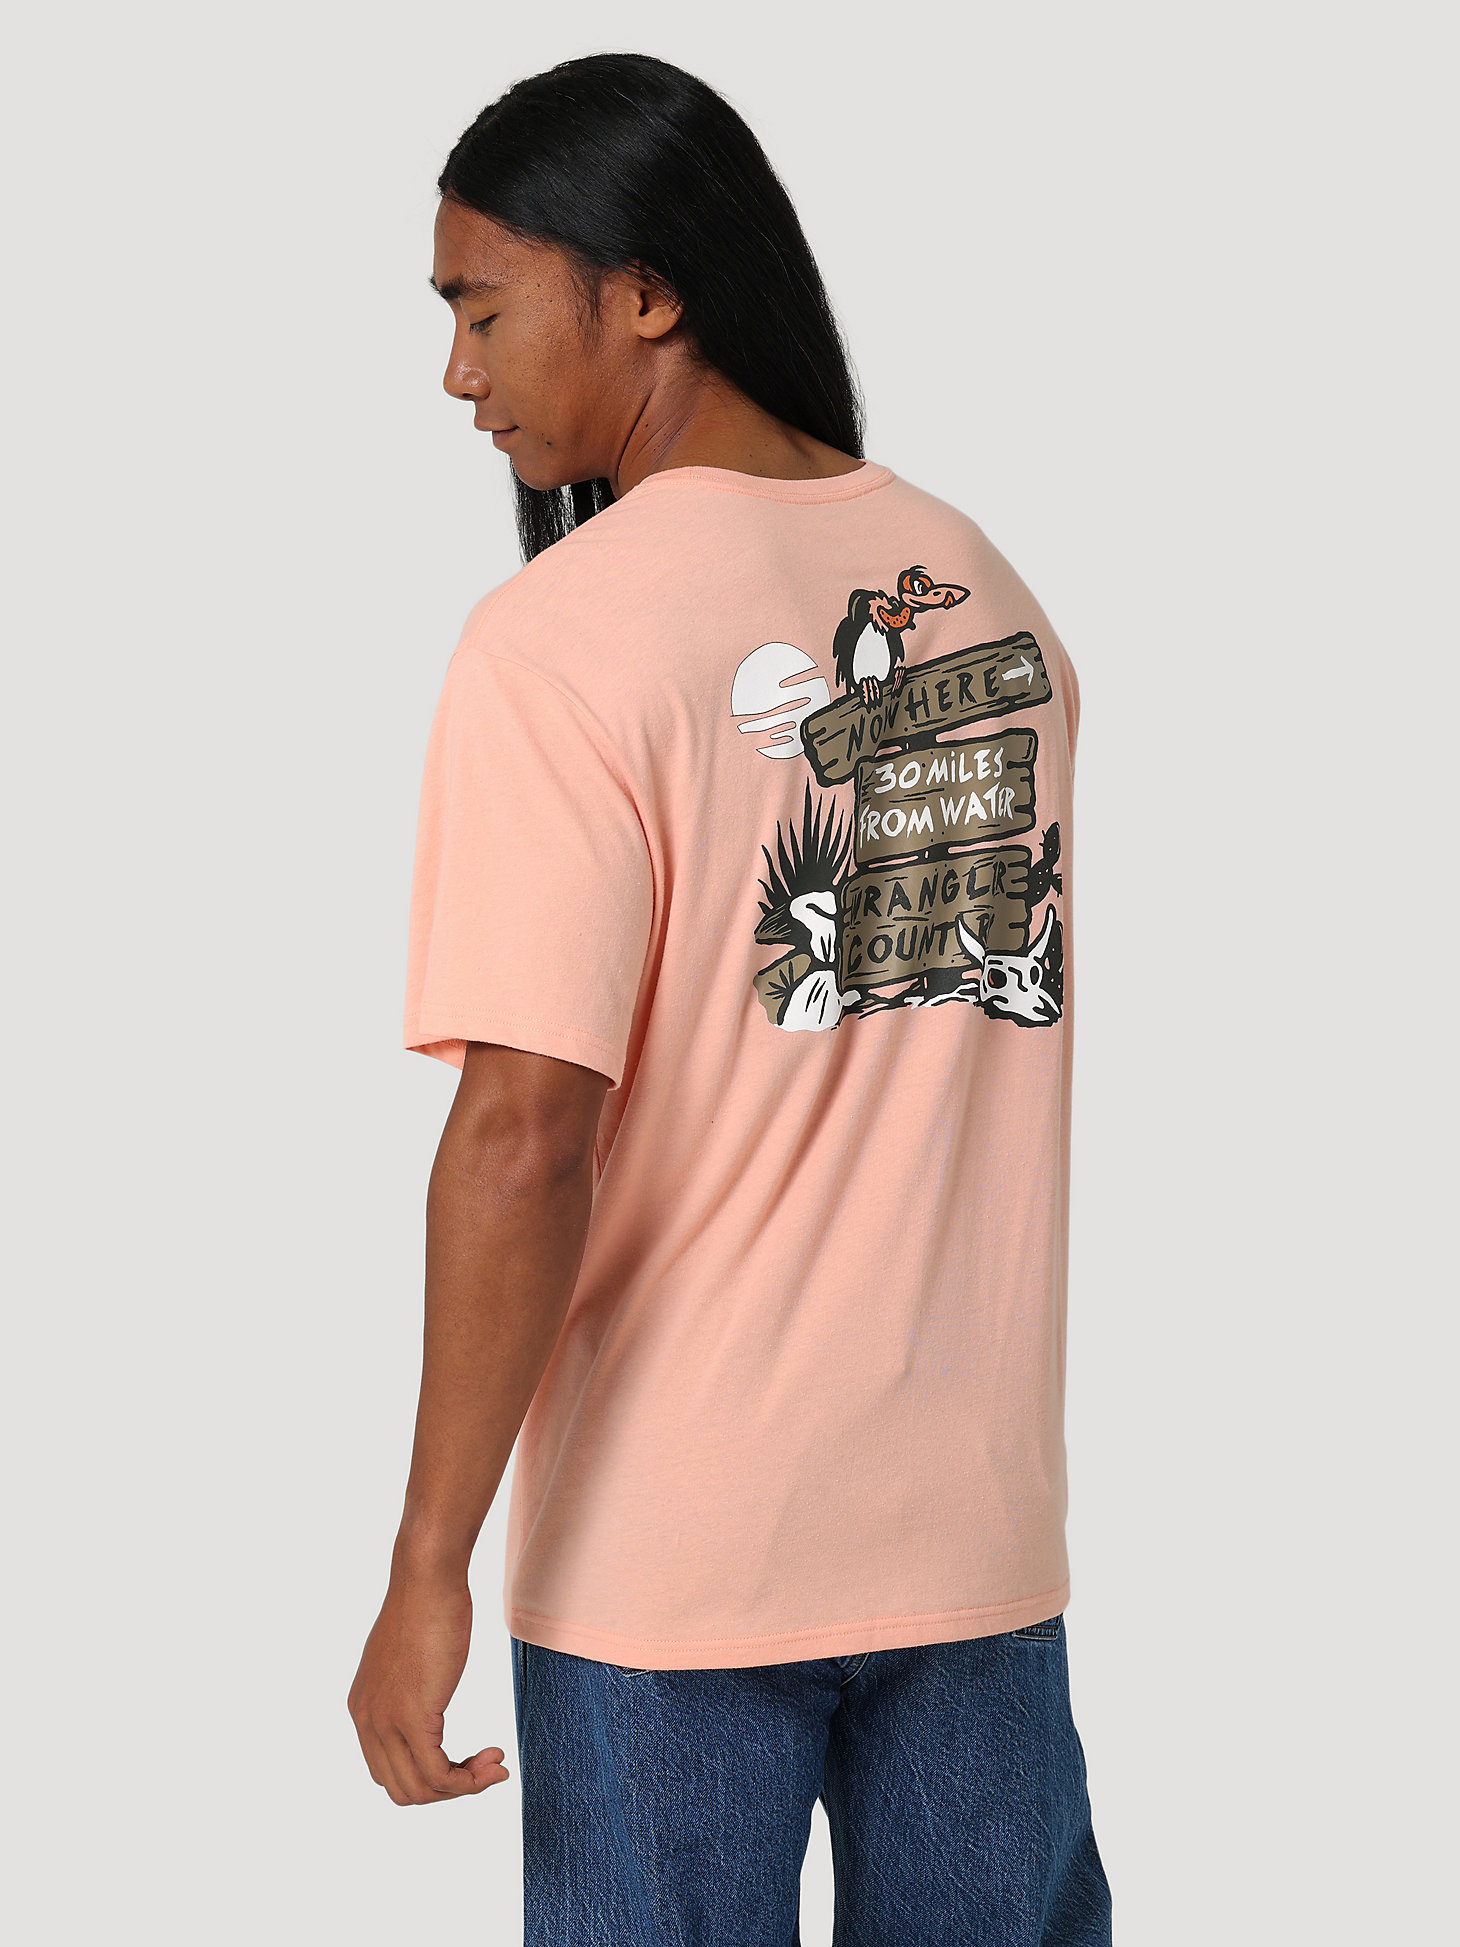 Men's Relaxed Deserted Graphic T-Shirt in Salmon alternative view 1